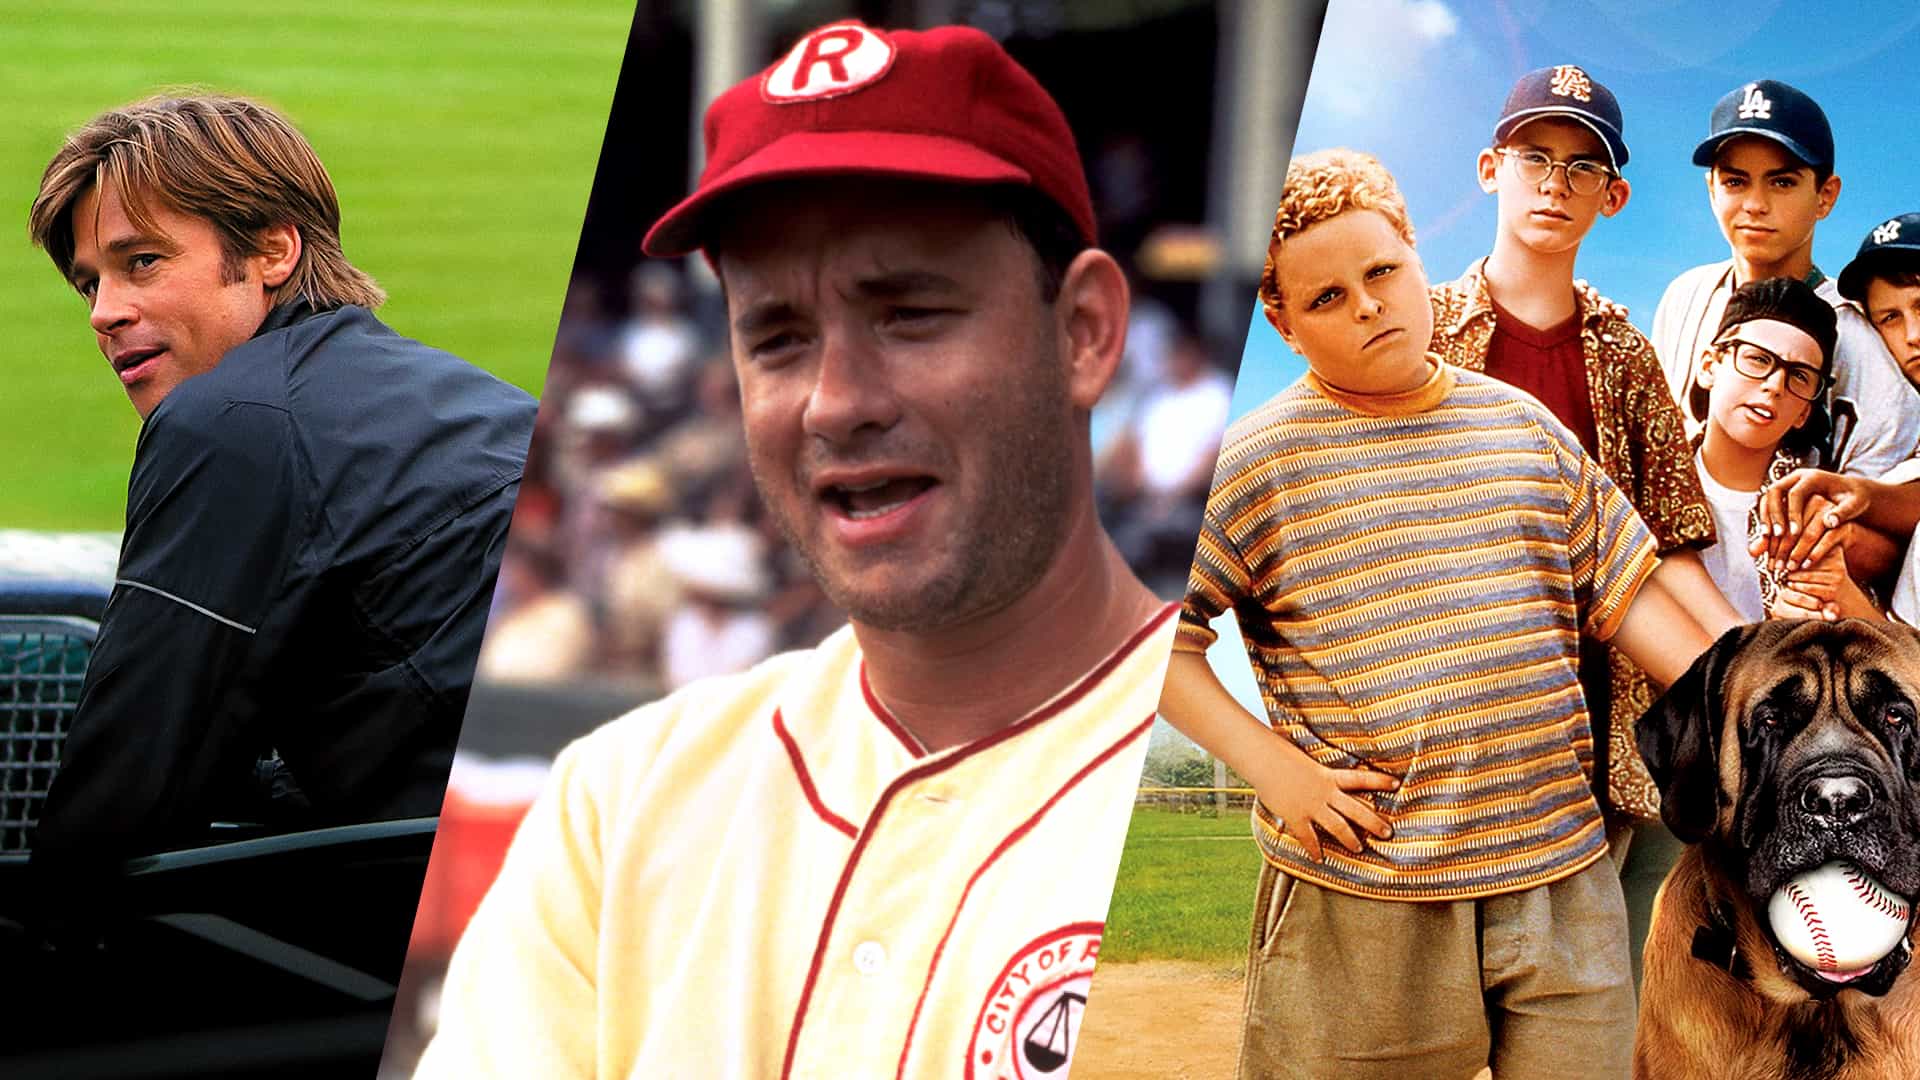 Top 8 Best Baseball Movies of All Time